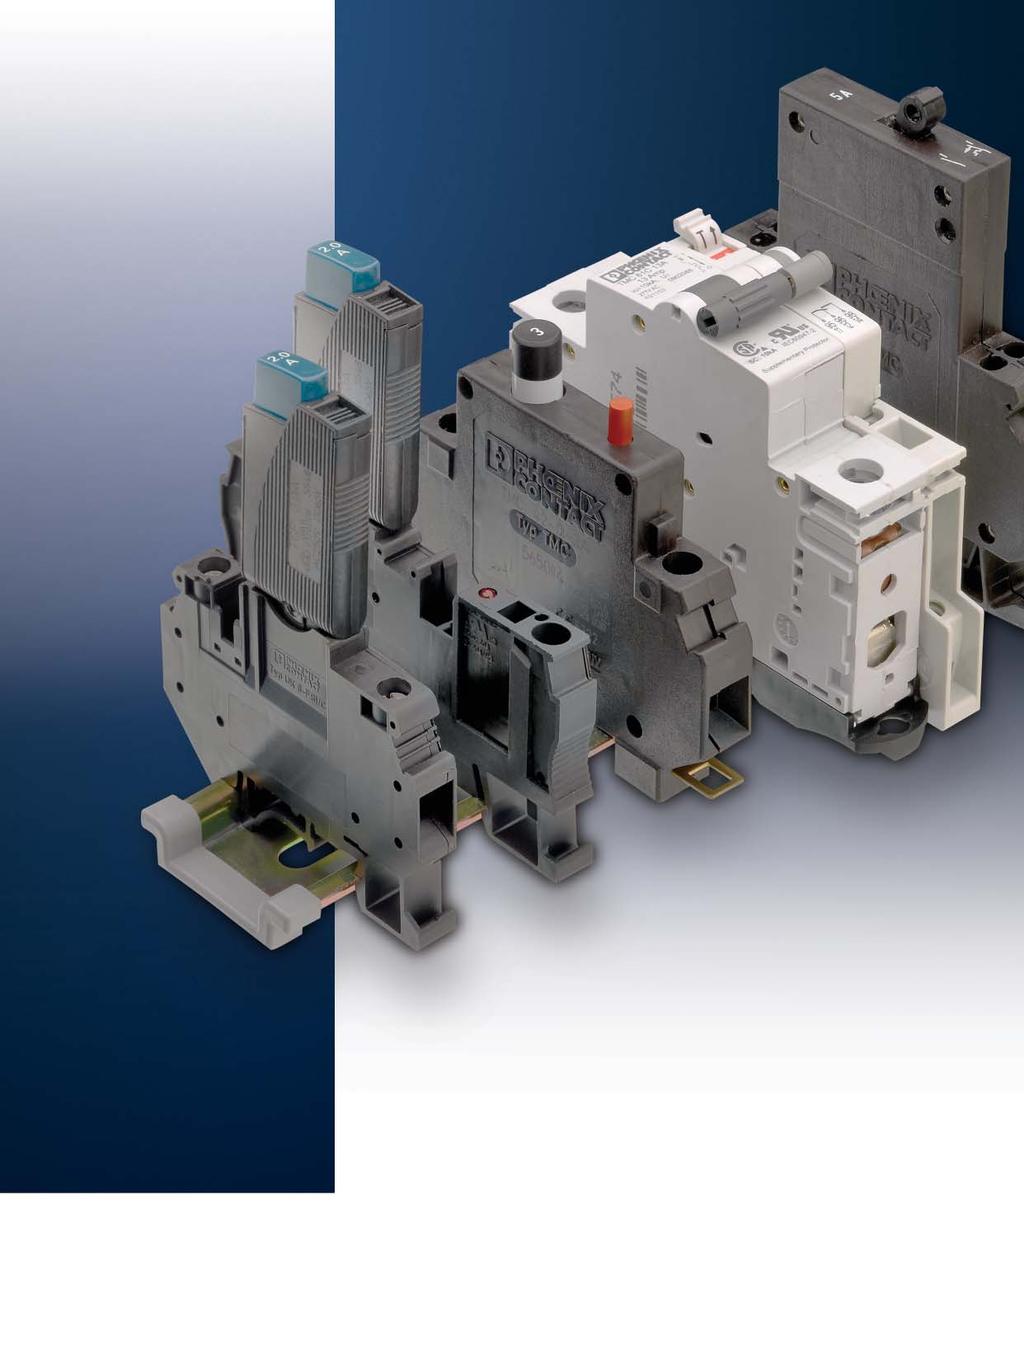 Phoenix Contact offers a full family of modular components covering virtually all of